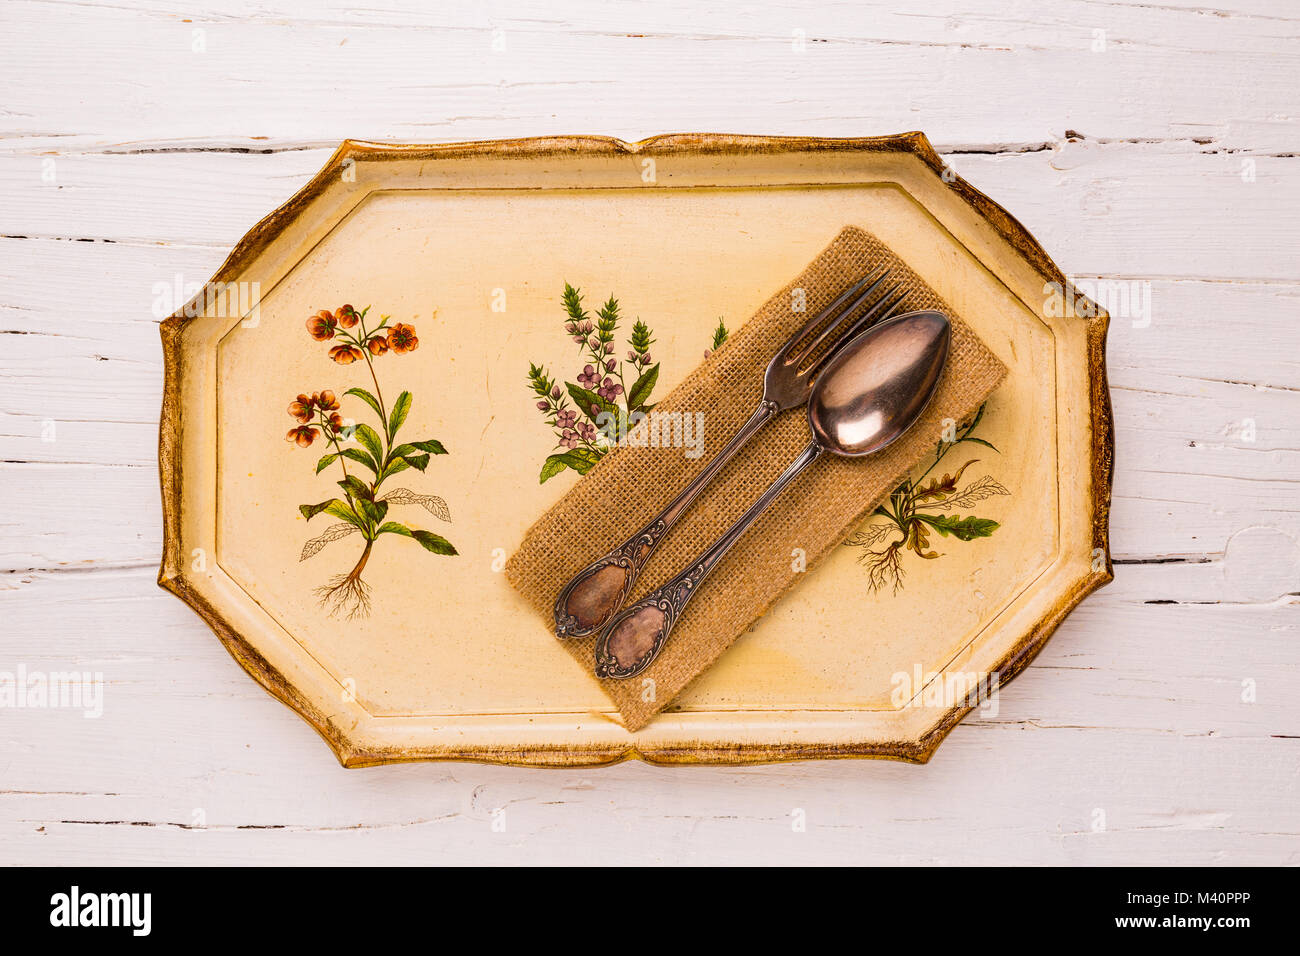 Antique tray with old cutlery spoon and fork  on white wooden background, view from above, flatlay. Stock Photo